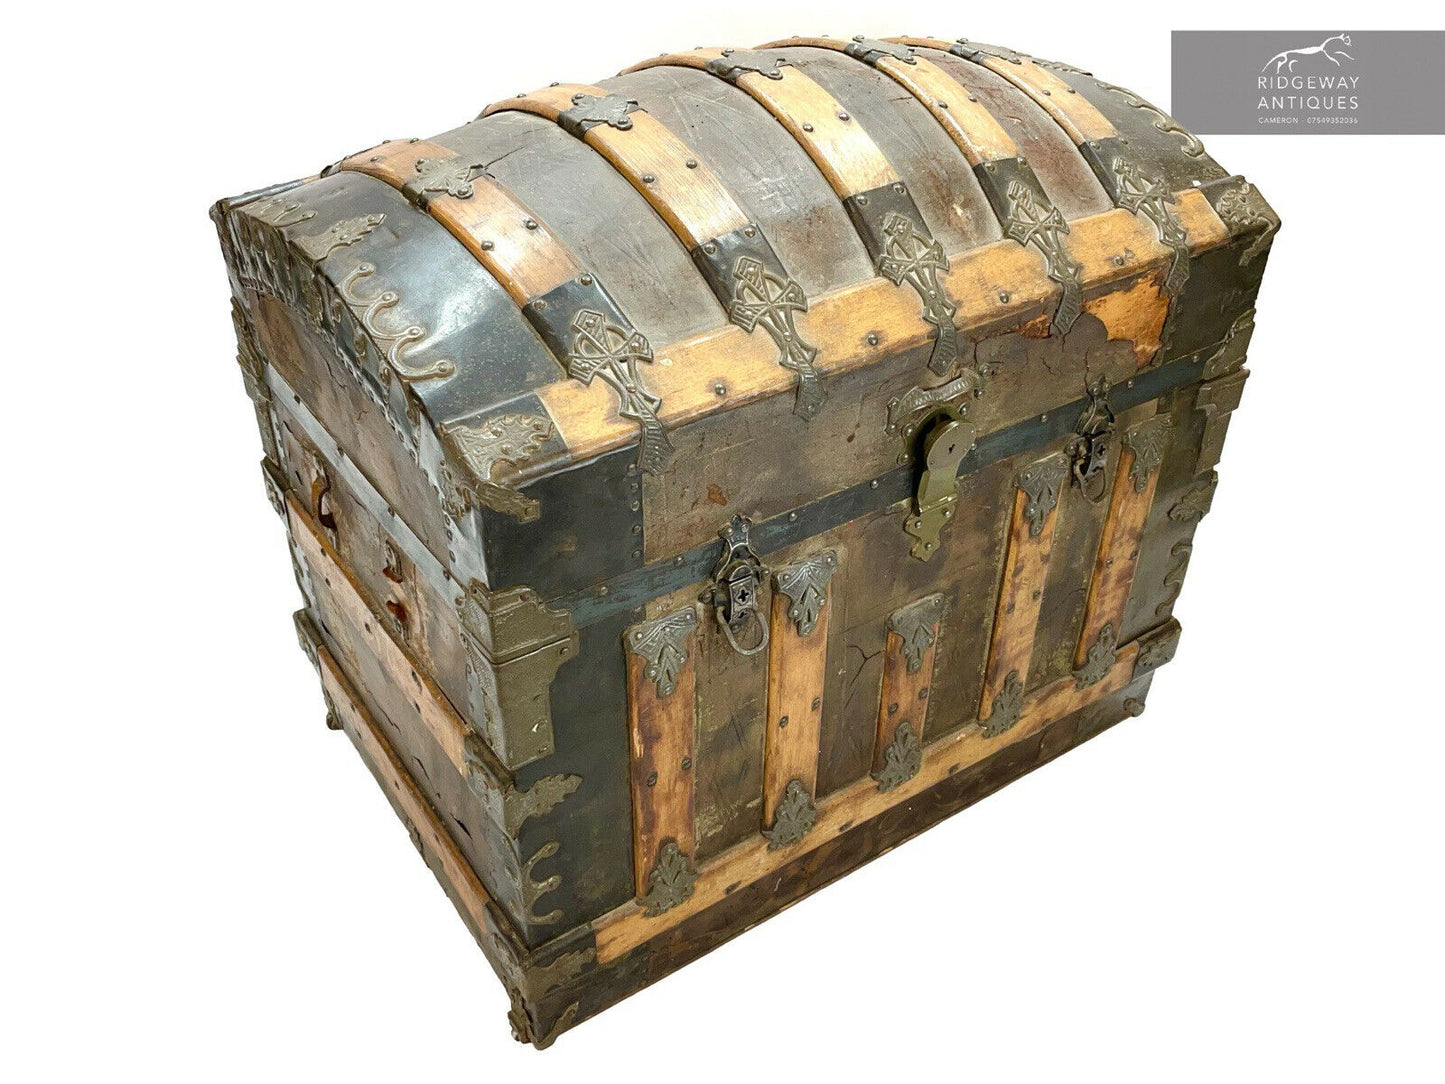 A 19th Century, Dome Topped, Iron Bound Steamer Trunk / Chest With Original Interior